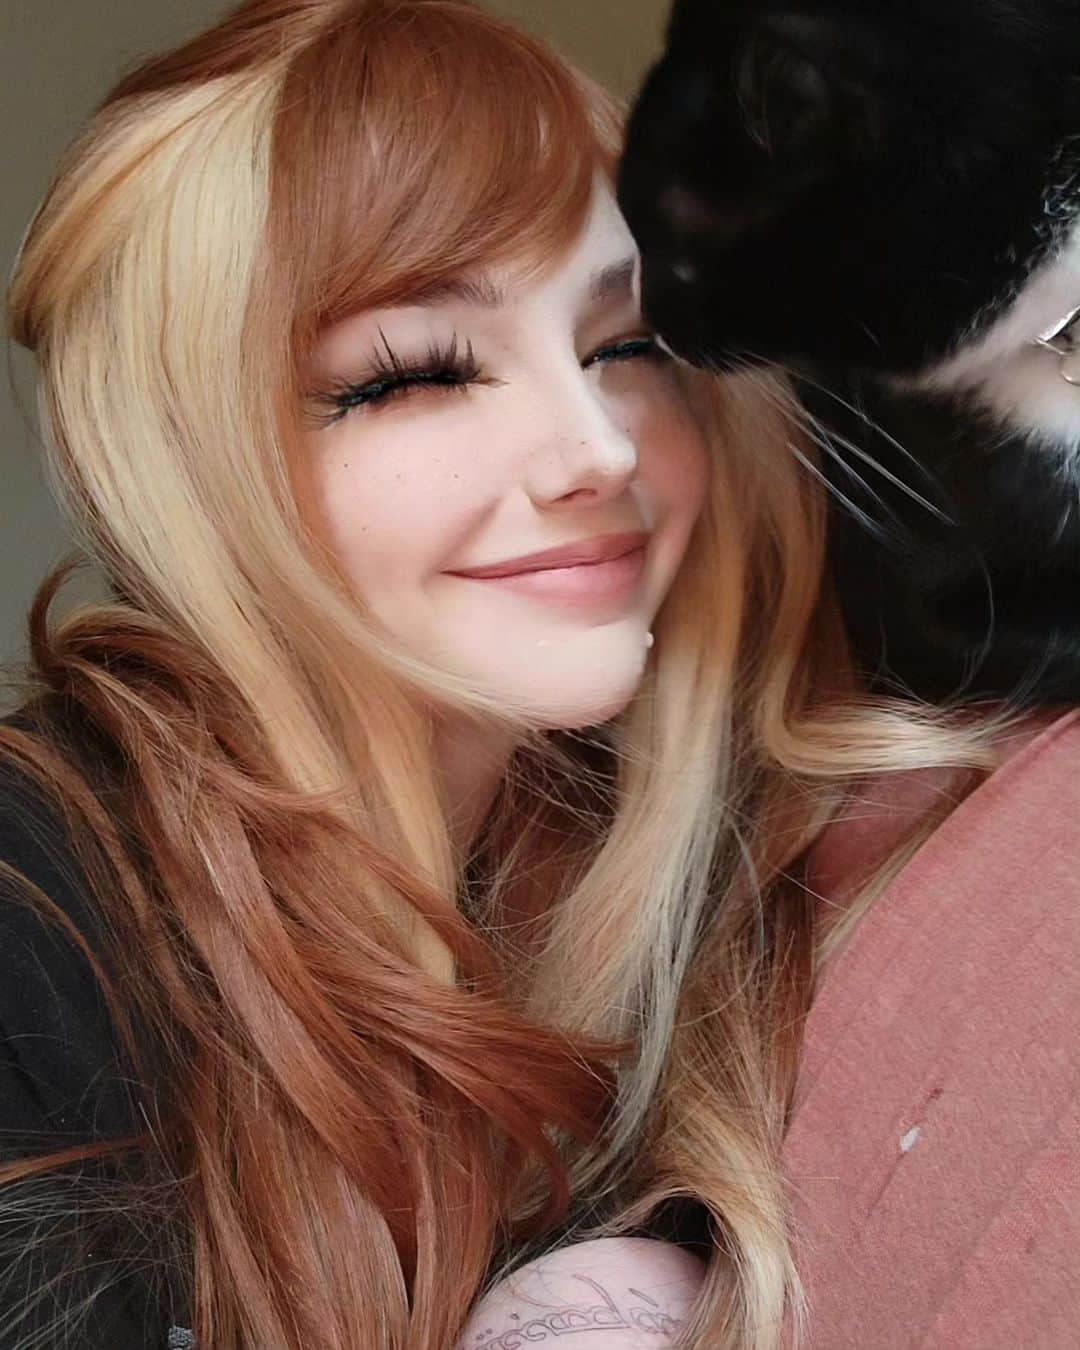 Nicole Eevee Davisのインスタグラム：「Midna kissed my eyelash ♡  I haven't posted here in almost a year but I'm still alive and well! Some huge life changes in 2020 put me in a period of self discovery and healing along with being completely burnt out so I took some time to myself :) I went a year without worrying about taking photos of myself or maintaining an online presence, I wanted to focus on life in the moment and be present. I believe it's therapeutic for everyone to do this once in a while to their own personal extent to stay in touch with themselves and reality ♡ I've moved out of California and have been living closer to nature more than I ever could there, being so close to the Canadian boarder is absolutely gorgeous and I've been loving every moment of it. Life's been really cozy for a while now and I've just been taking time to enjoy that for the first time in my life really, enjoying the ride and having great experiences with loved ones along the way :) I want to start posting here again and share my life again, I'm hoping you can welcome me back to your feeds with the occasional post to say hello here and there again because I've truly missed this as well ♡ beyond that I hope you're all doing well and living your lives to the fullest! -Evie」